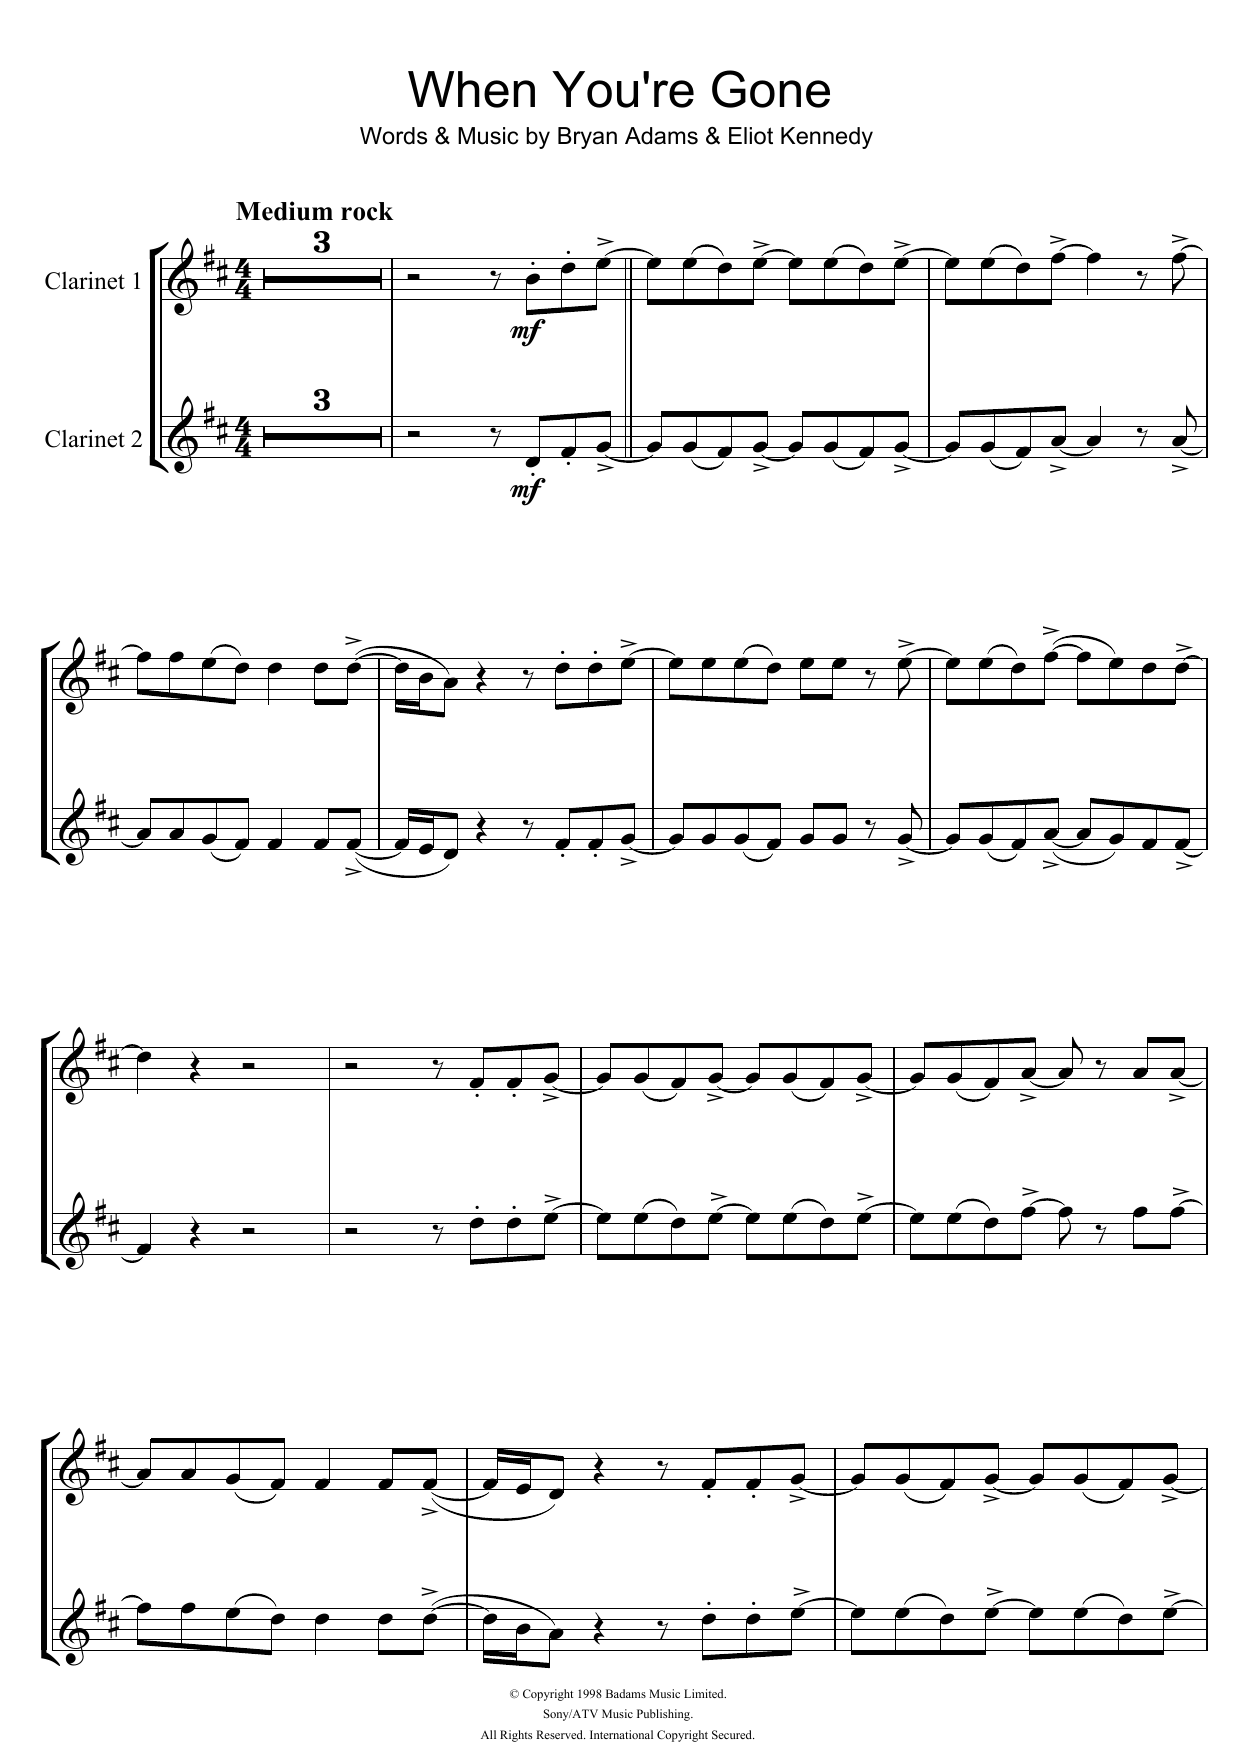 Download Bryan Adams and Melanie C When You're Gone Sheet Music